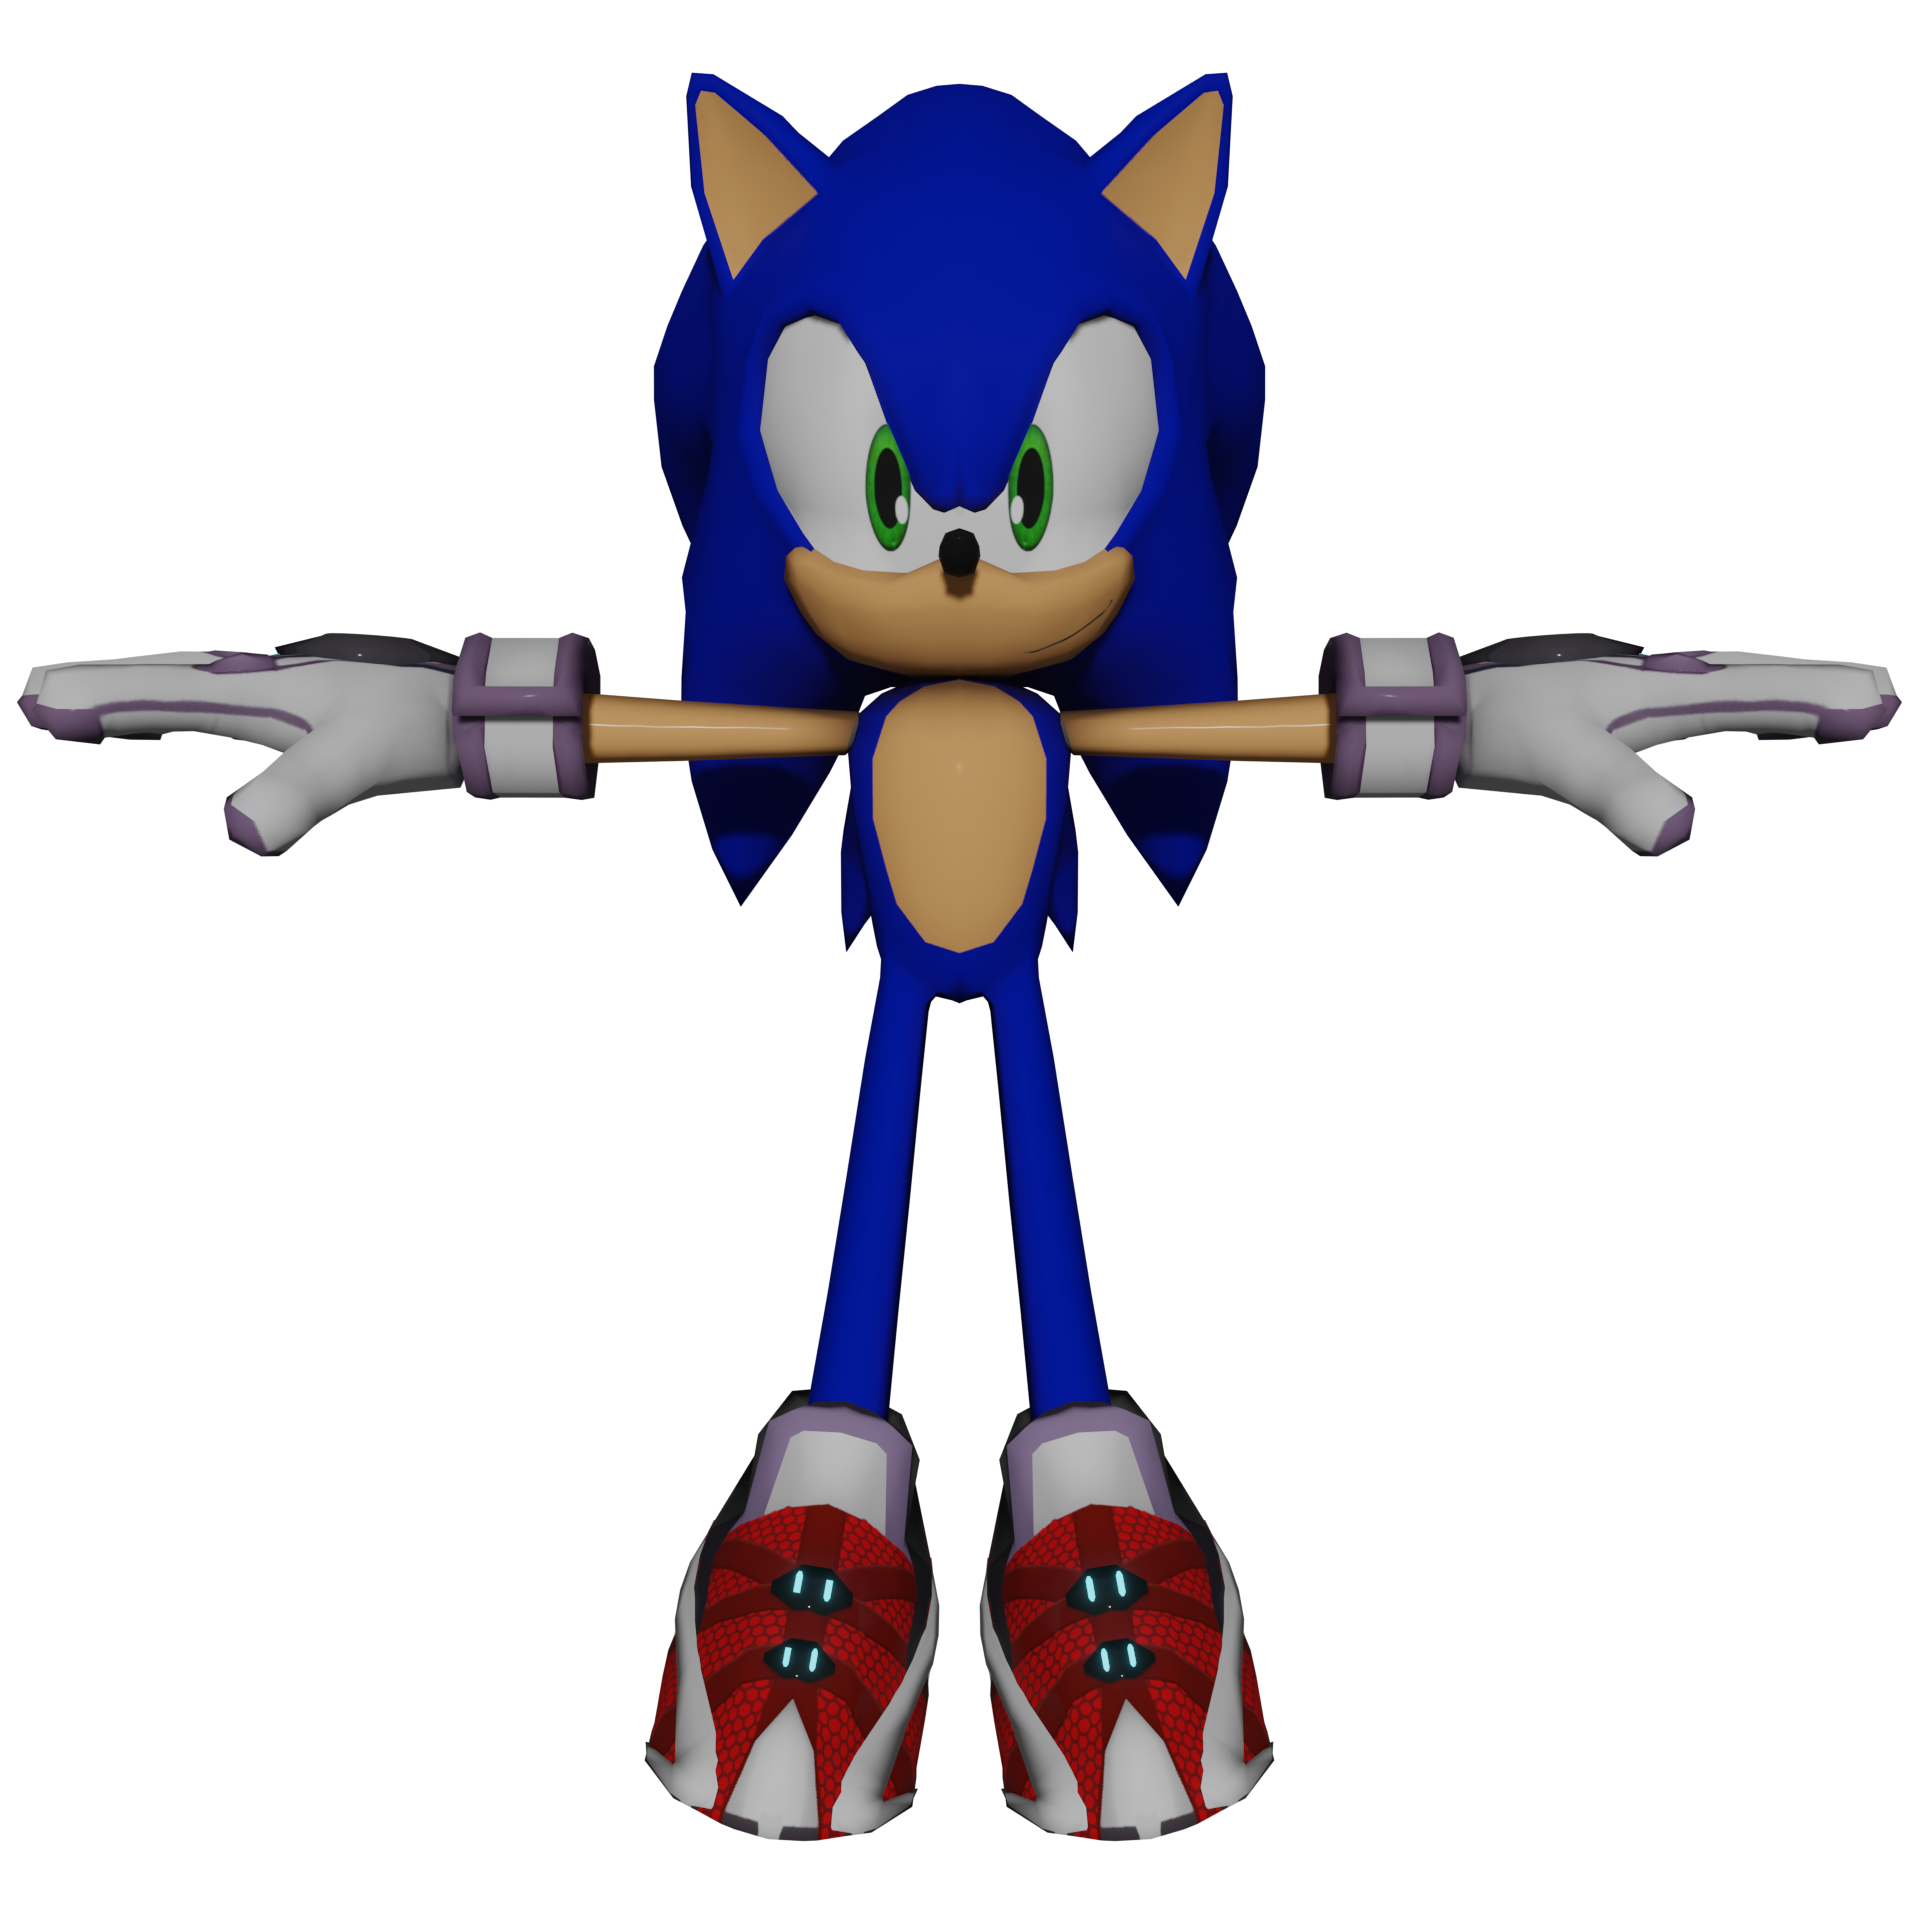 hi nonic power look new toys sonic prime by ameenpro on DeviantArt